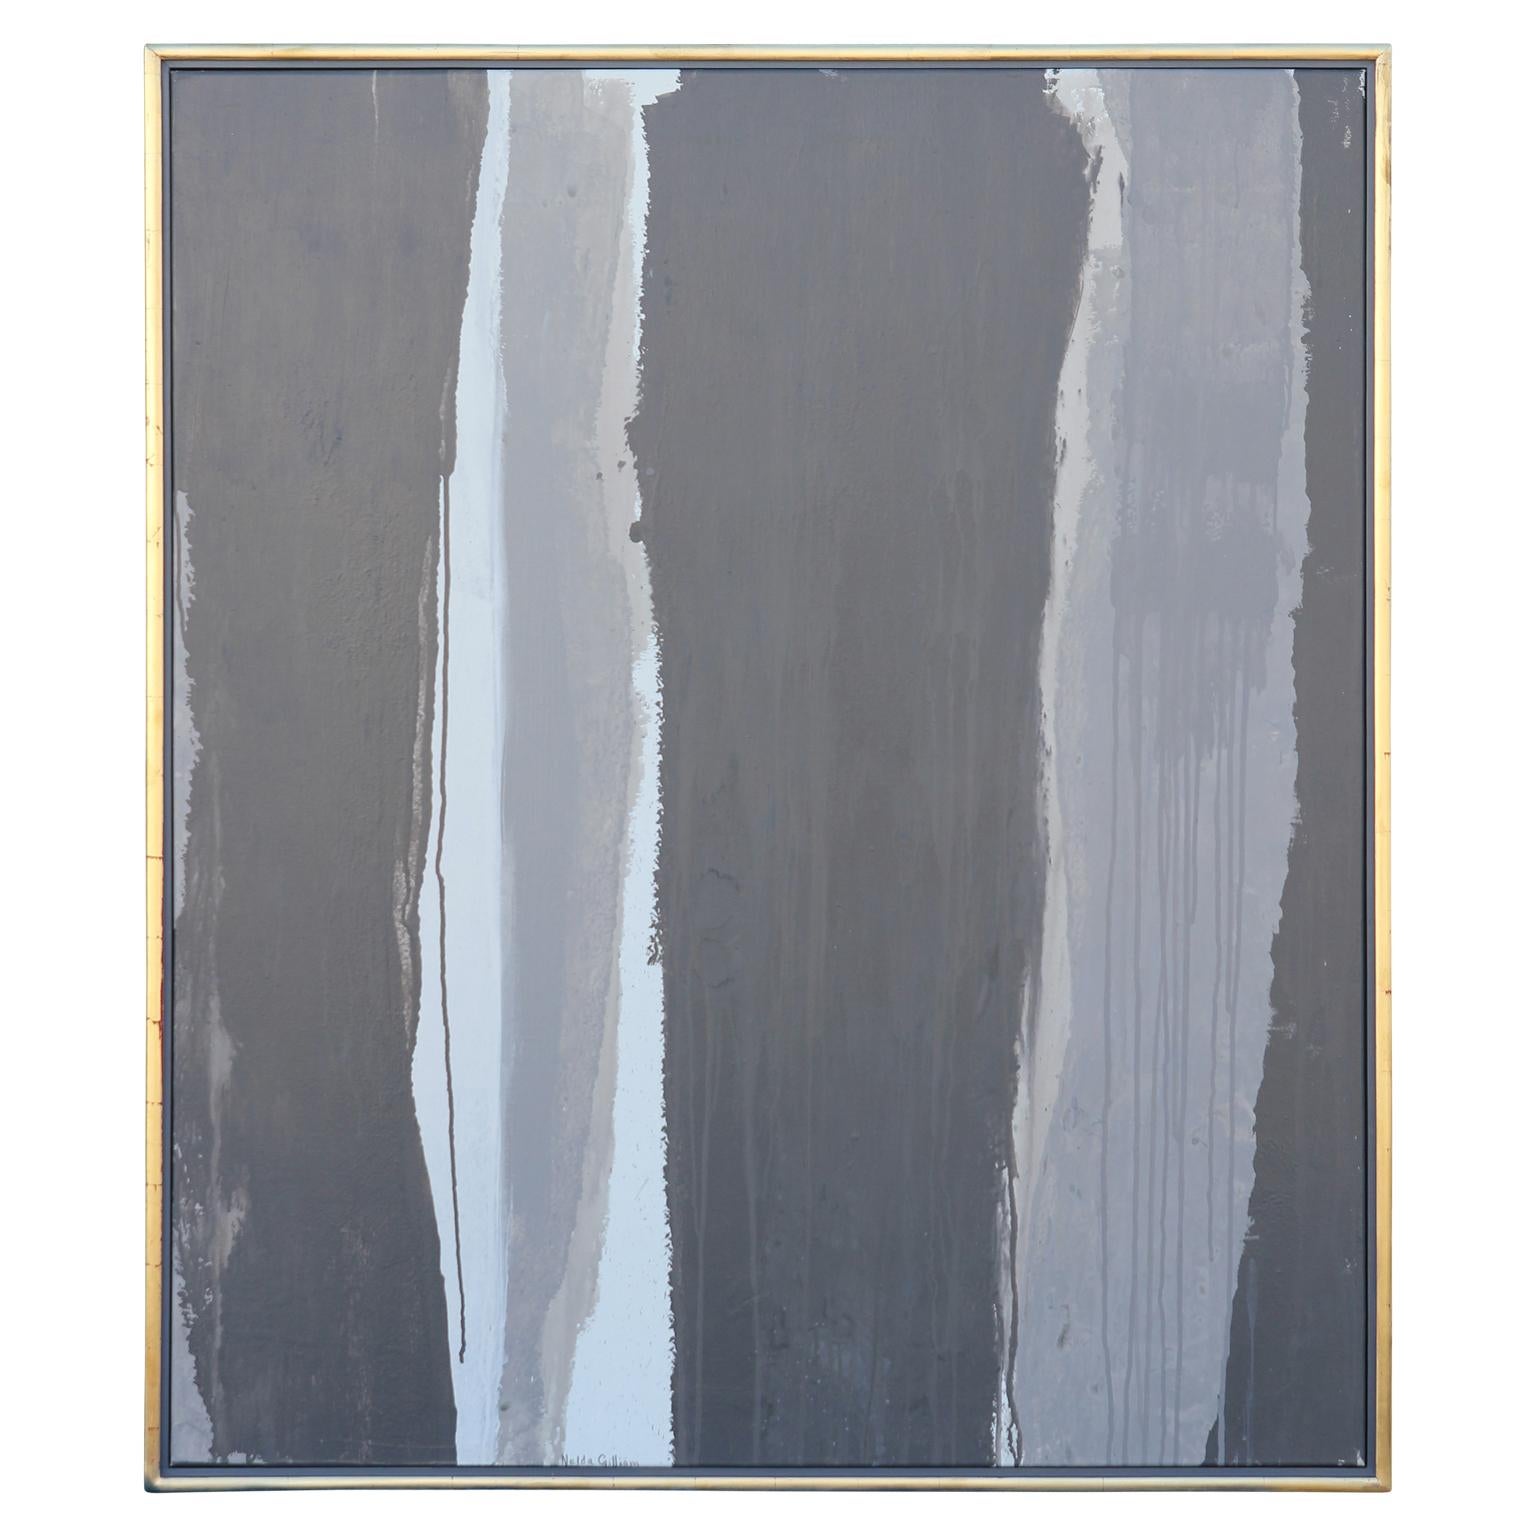 Minimal linear abstract painting in a contemporary style. The work is signed and dated by the artist in the bottom corner and on the back of the canvas. The piece is framed in a gold leaf frame.
Dimensions without Frame: H 47 in x W 39 in x D 1 in.